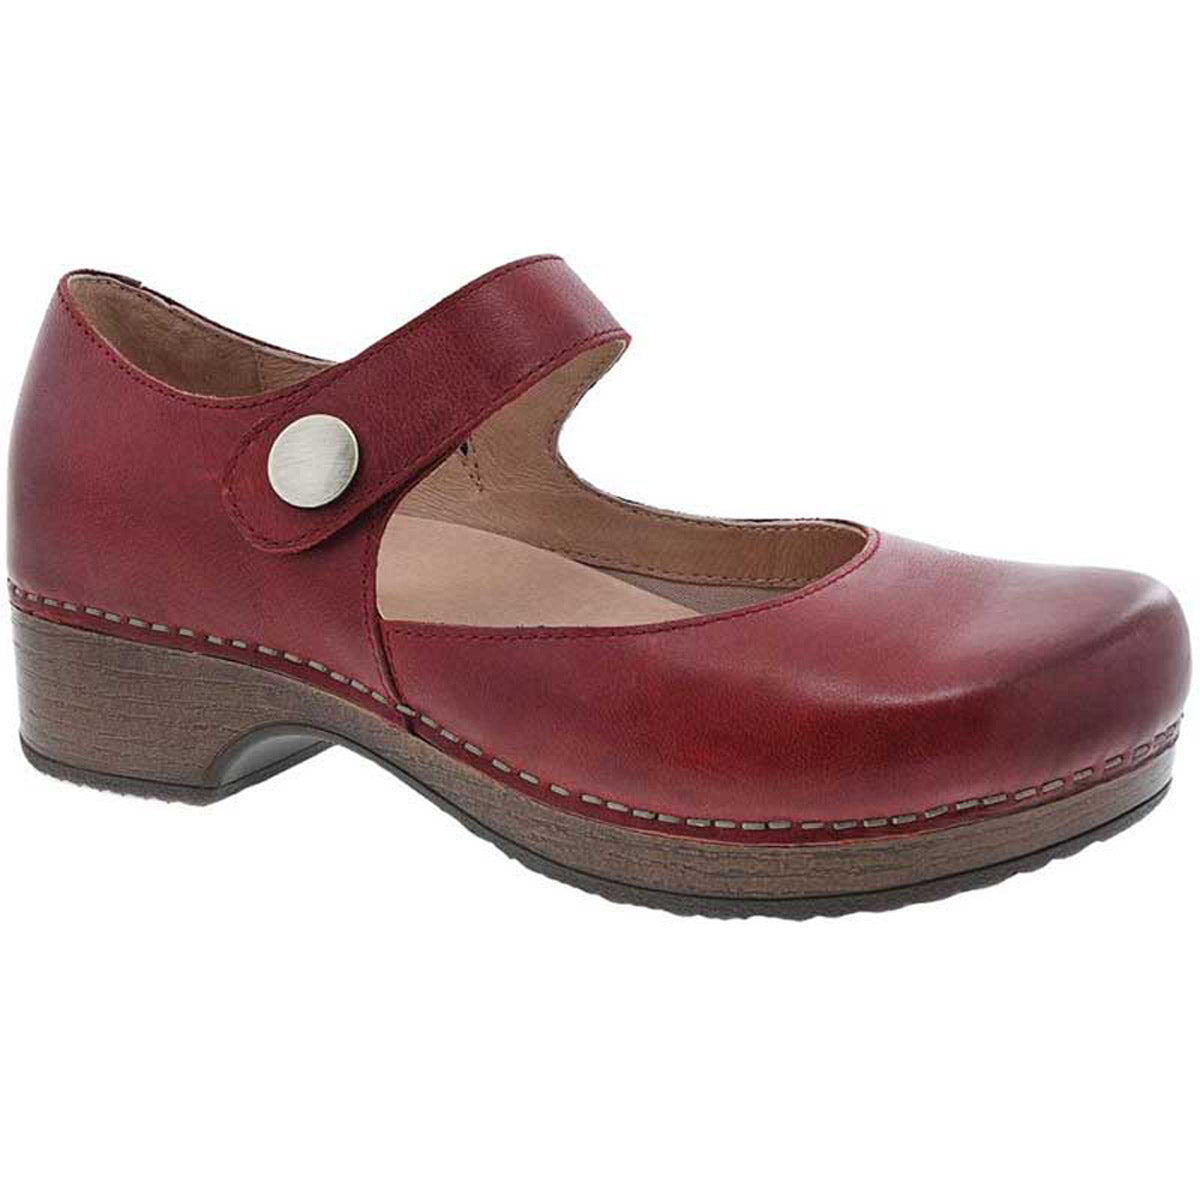 Women's Dansko Beatrice Red Waxy Burnished Mary Jane shoe with a strap and button closure on a white background.